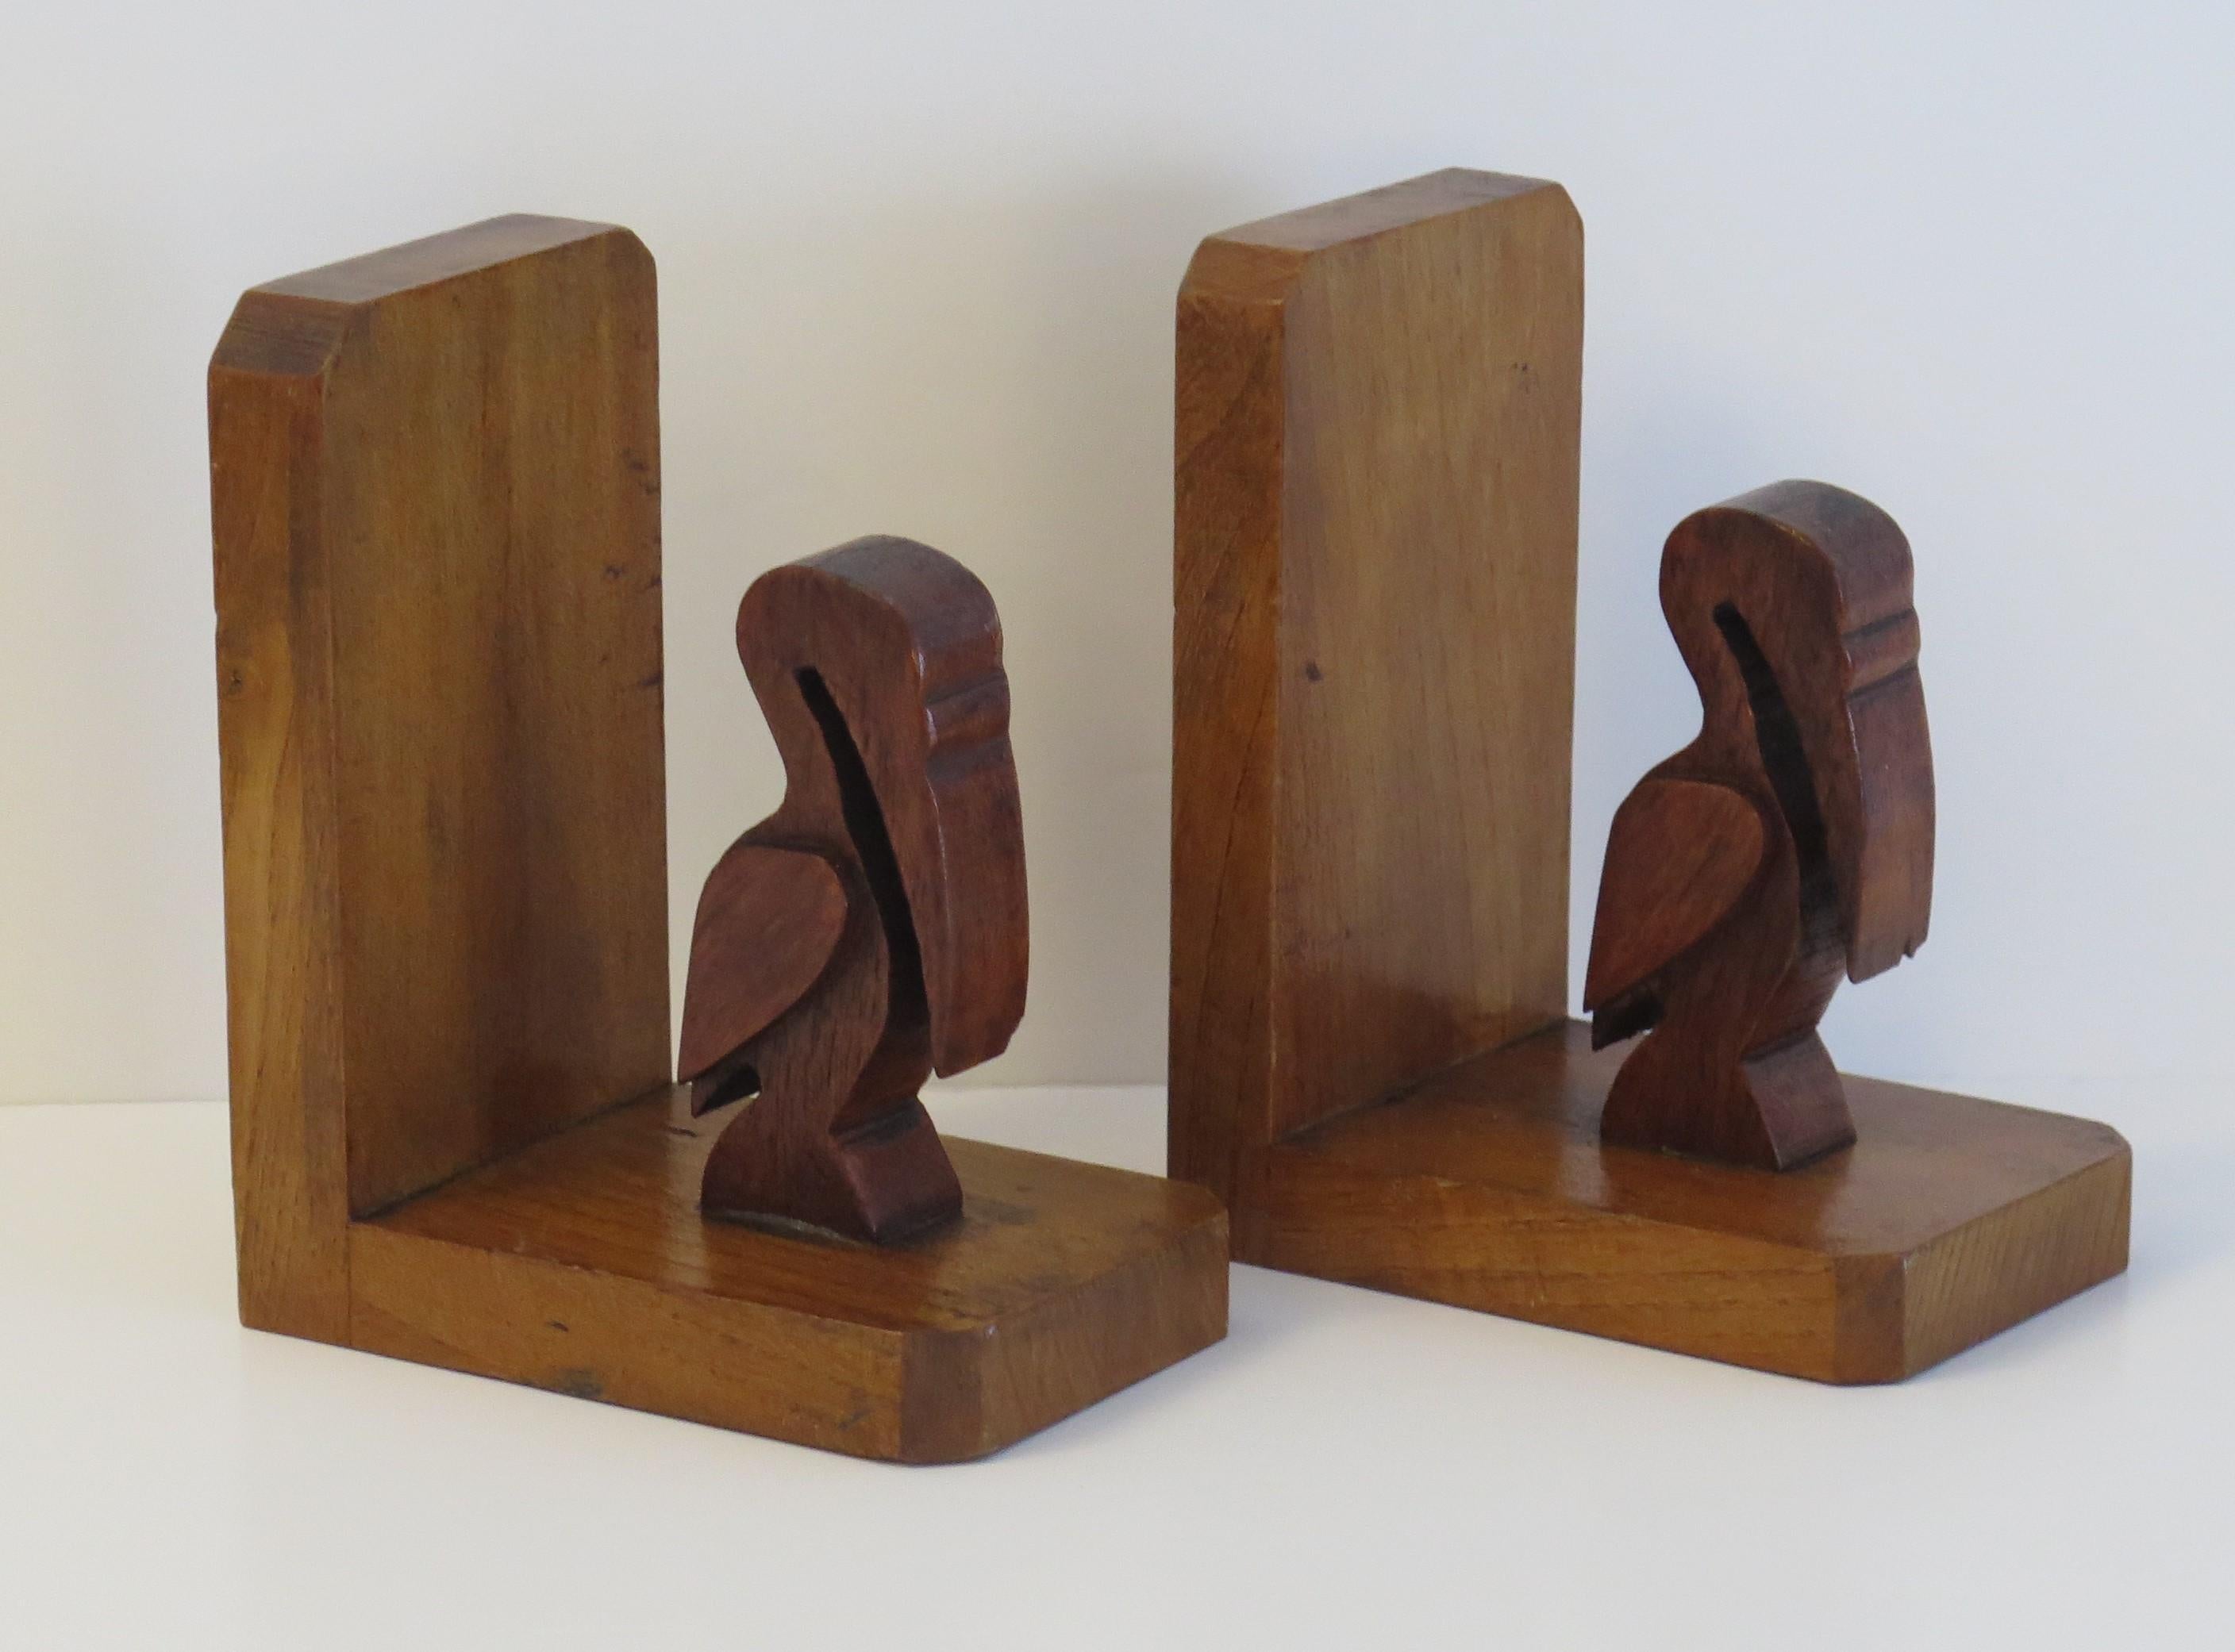 These are a good pair of Art Deco period, Book ends of two Pelicans hand carved in wood. 

Each stylised pelican has been well hand carved in a dark hardwood and stands on a base frame of a lighter contrasting wood, all with a hand polished